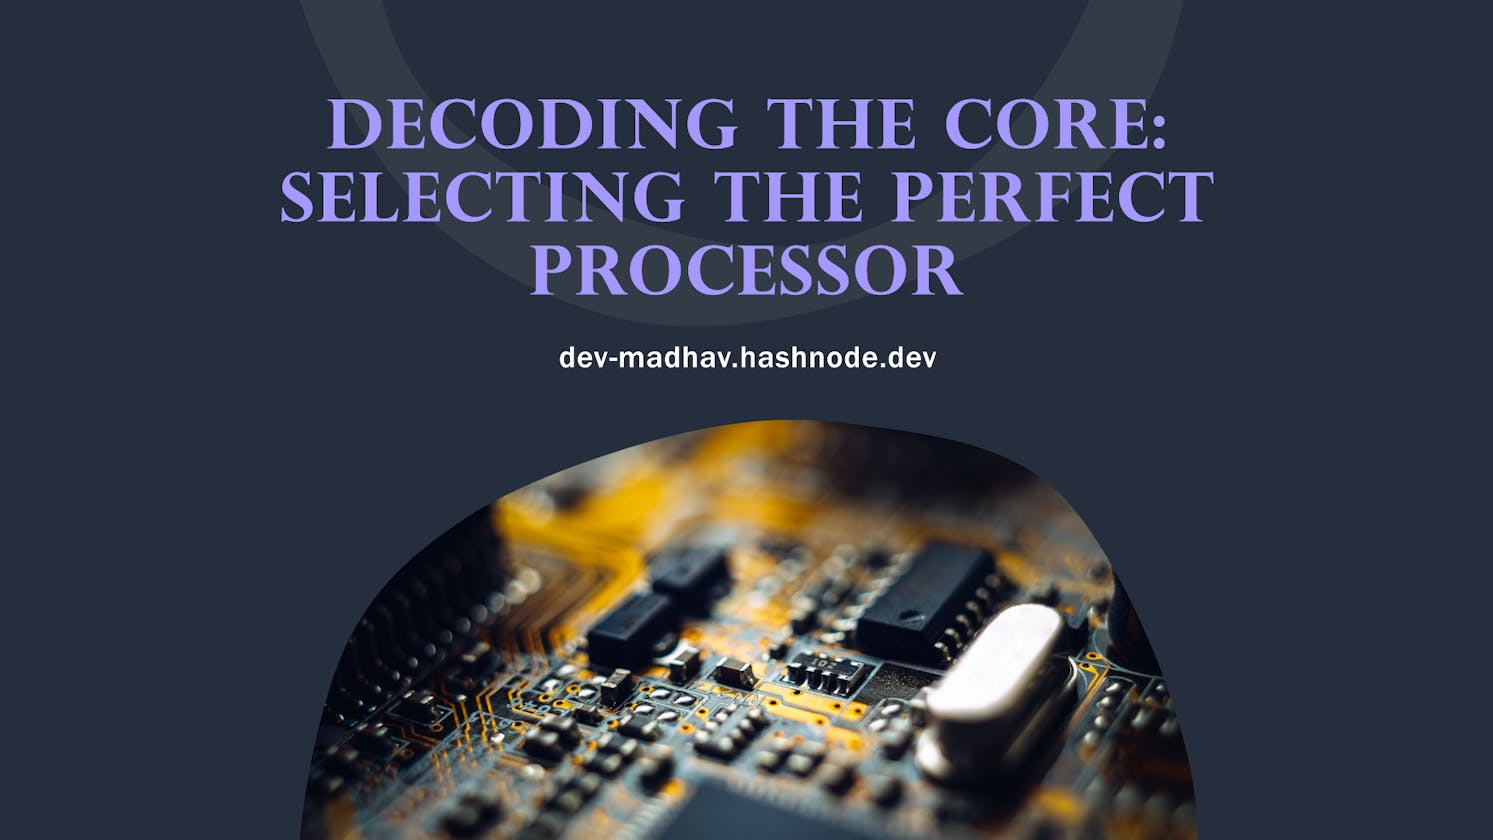 Decoding the Core: Selecting the Perfect Processor